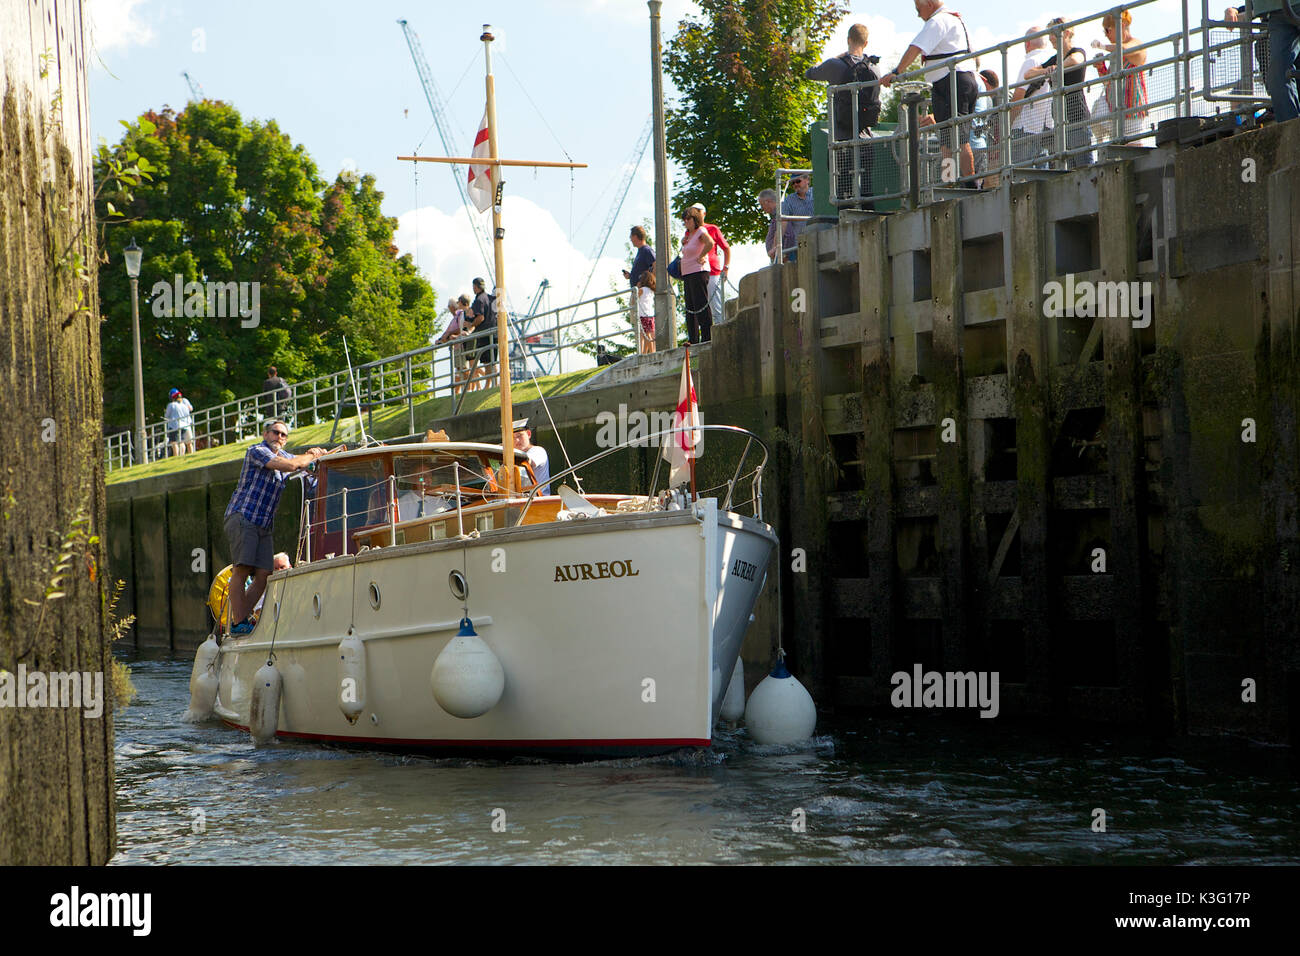 Teddington, Middlesex, United Kingdom. 2nd Sep, 2017. Teddington Lock gates open to allow 'Aureol', a member of the Association of Dunkirk Little Ships to continue it's journey downstream on the river Thames Credit: Emma Durnford/ Alamy Live News Stock Photo